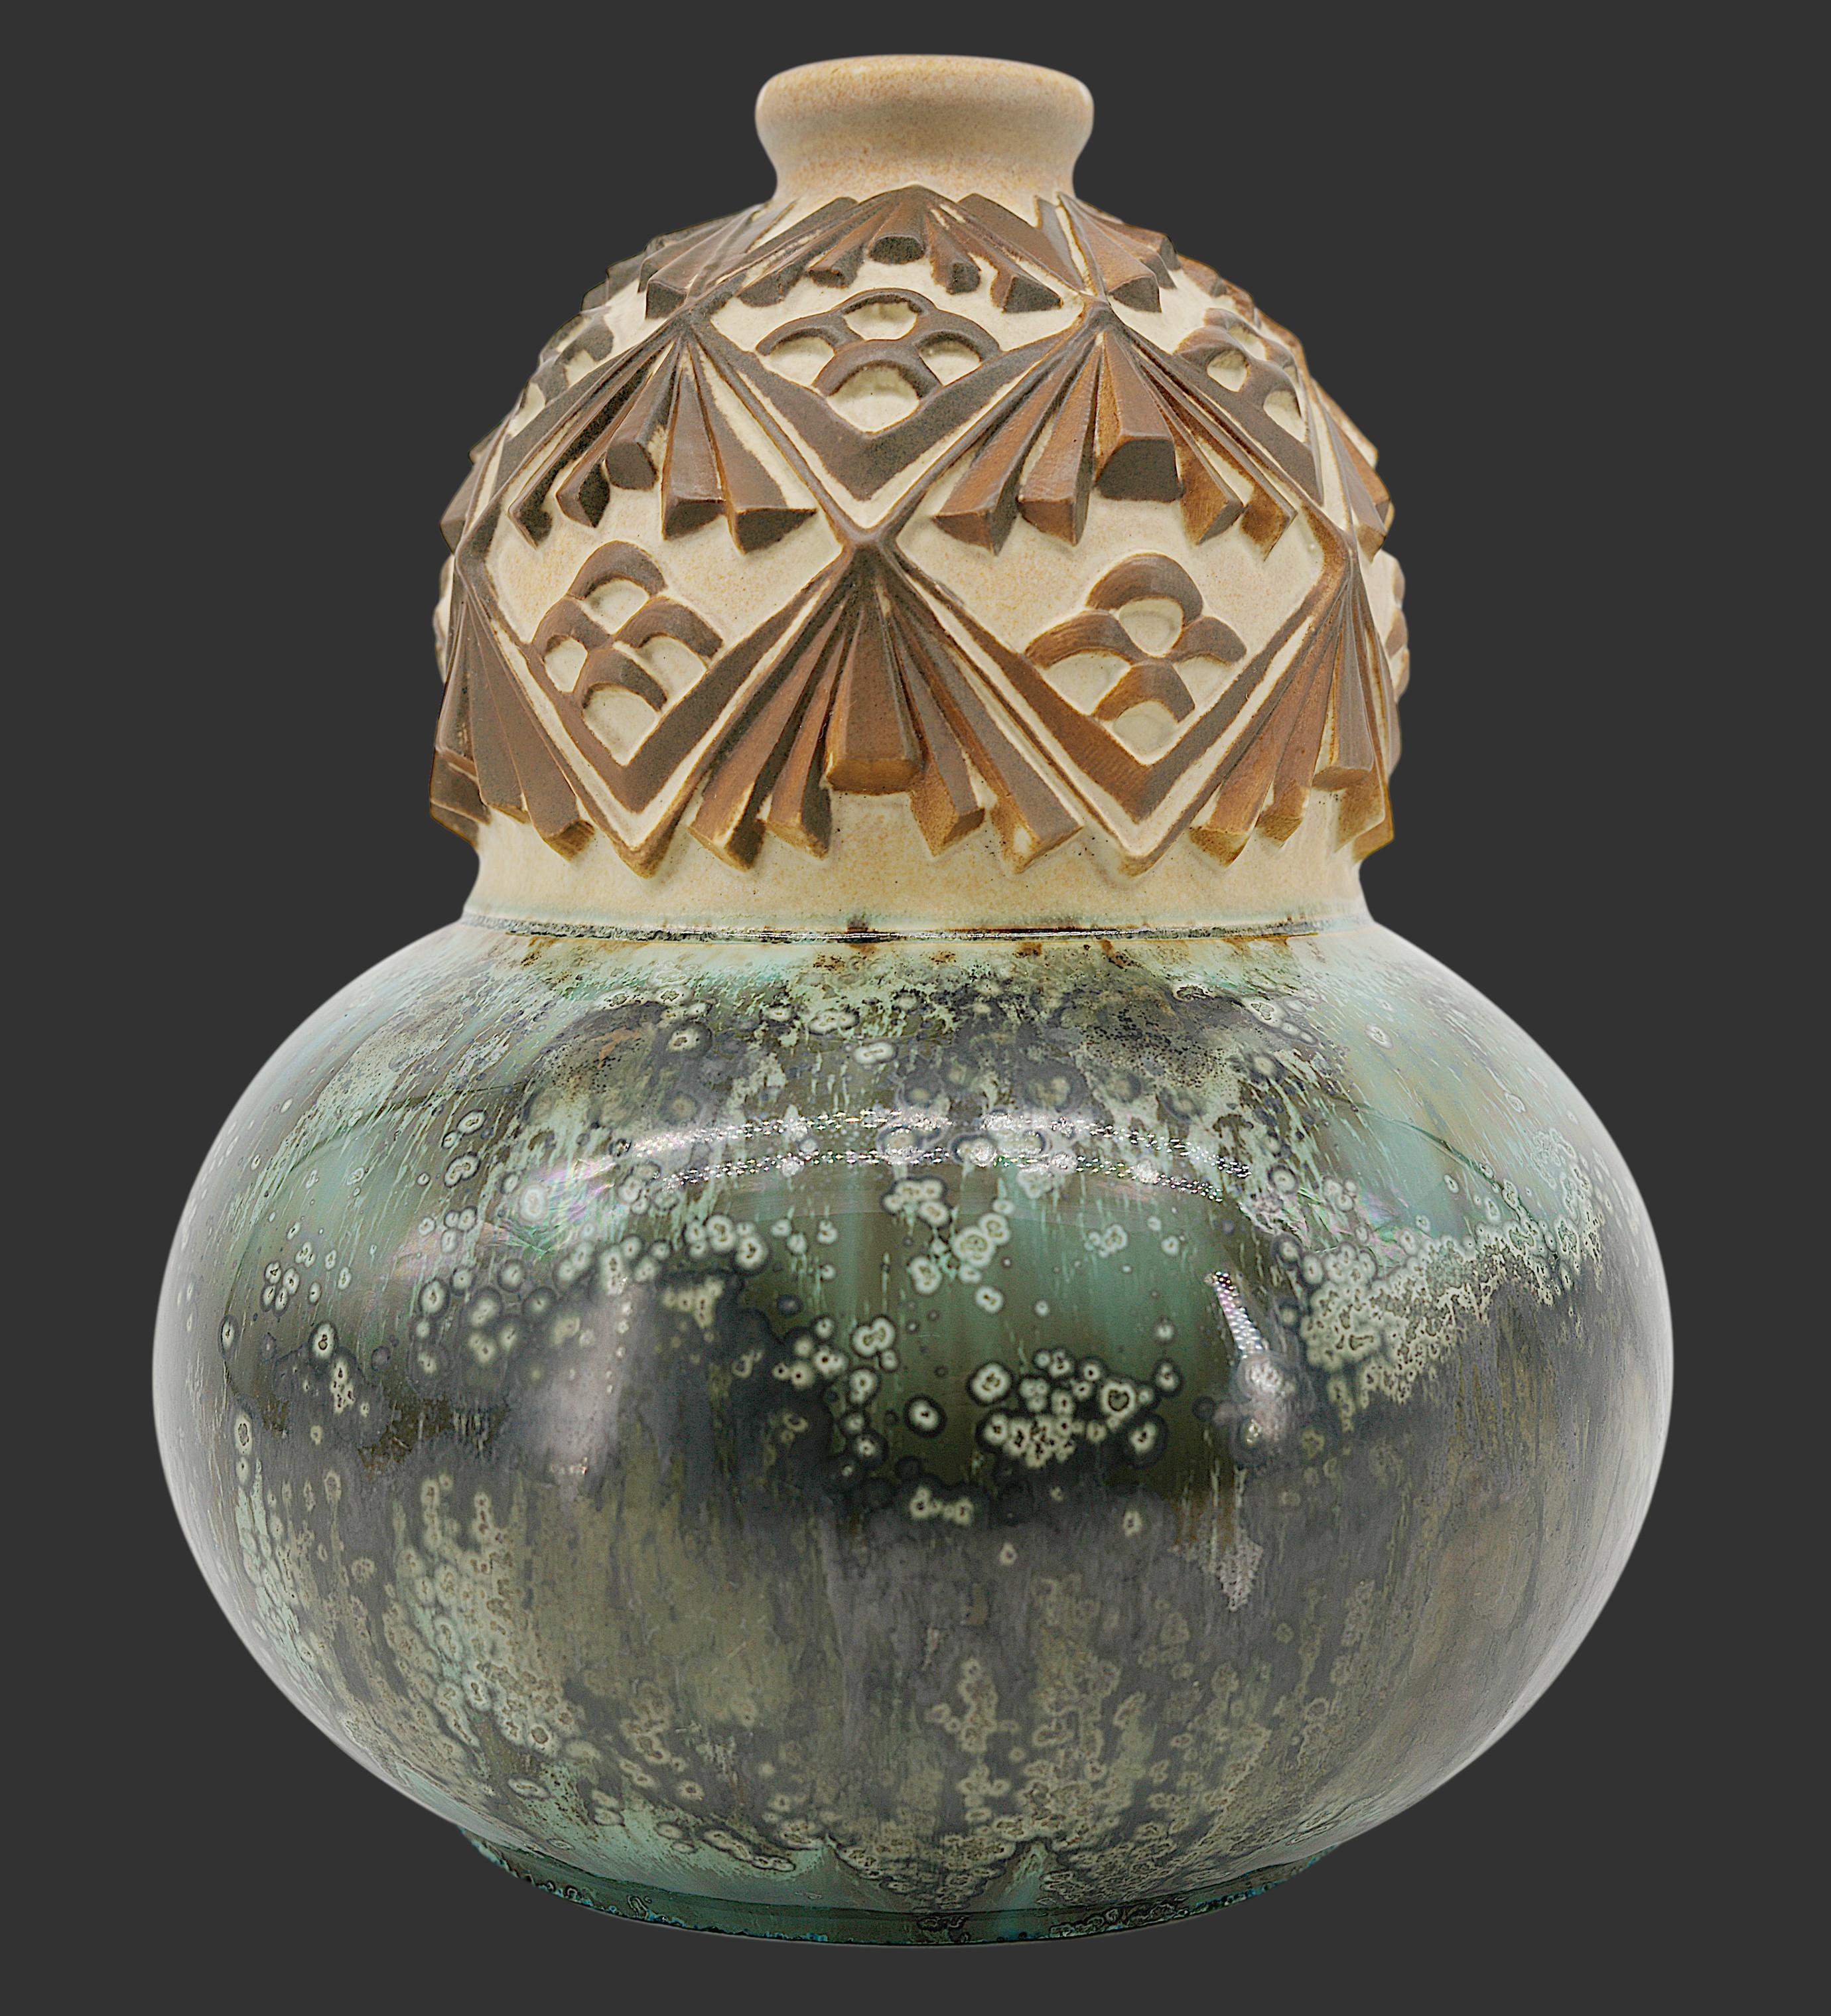 French Art Deco stoneware vase by Joseph MOUGIN (1876-1961), Luneville (Nancy), France, ca.1930. Coloquinte vase in stoneware, base covered with green crystallized enamel, upper part decorated with stylized pinecones and needles on a beige